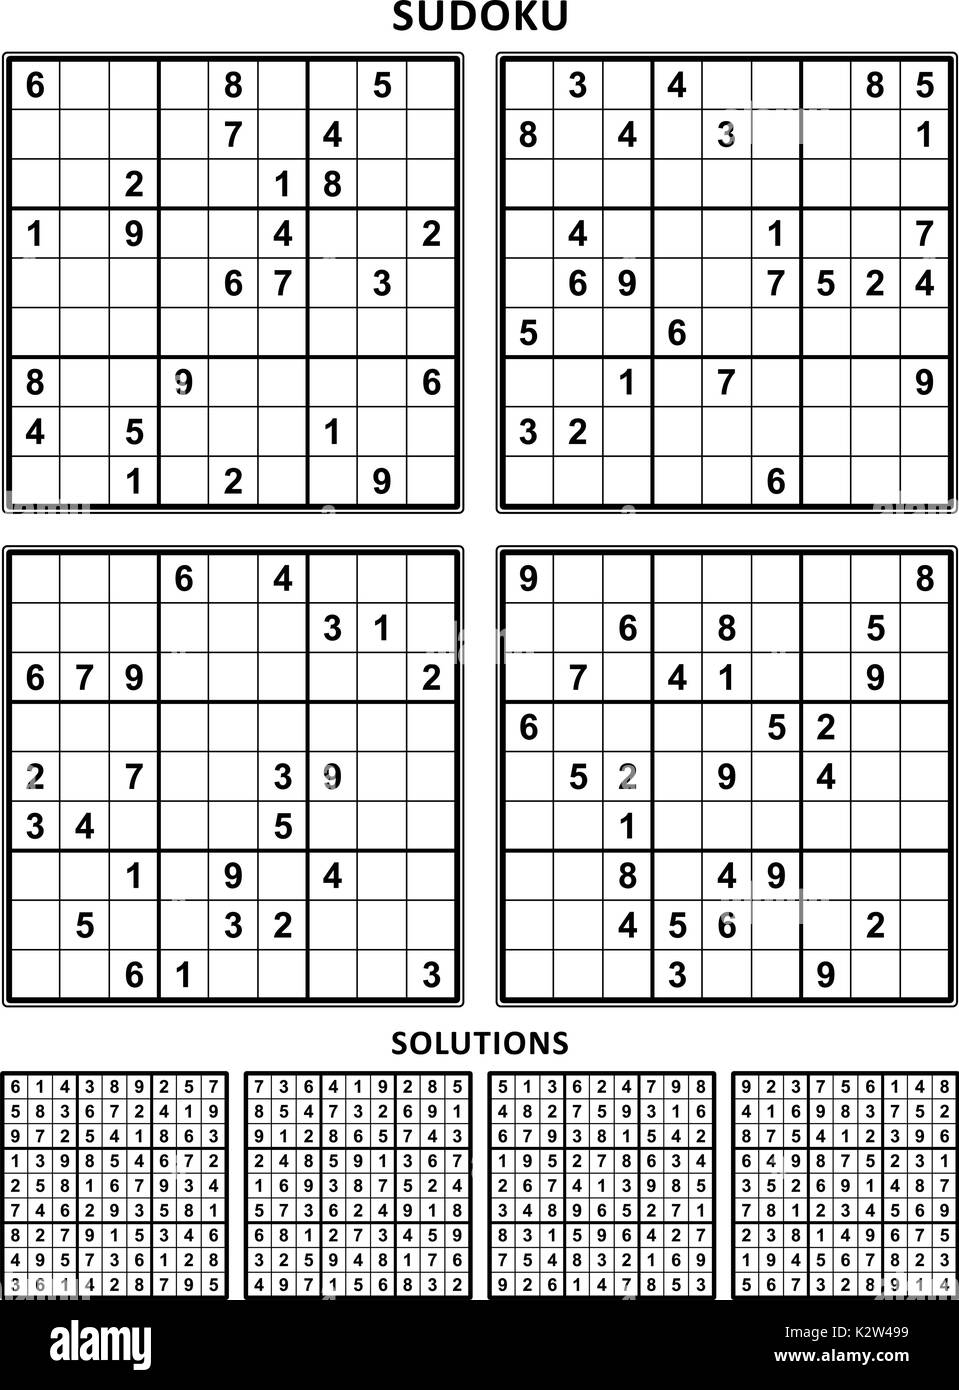 Four sudoku puzzles of comfortable (easy, yet not very easy) level, suitable for large books, answers included. Set 7 Stock Image & Art Alamy